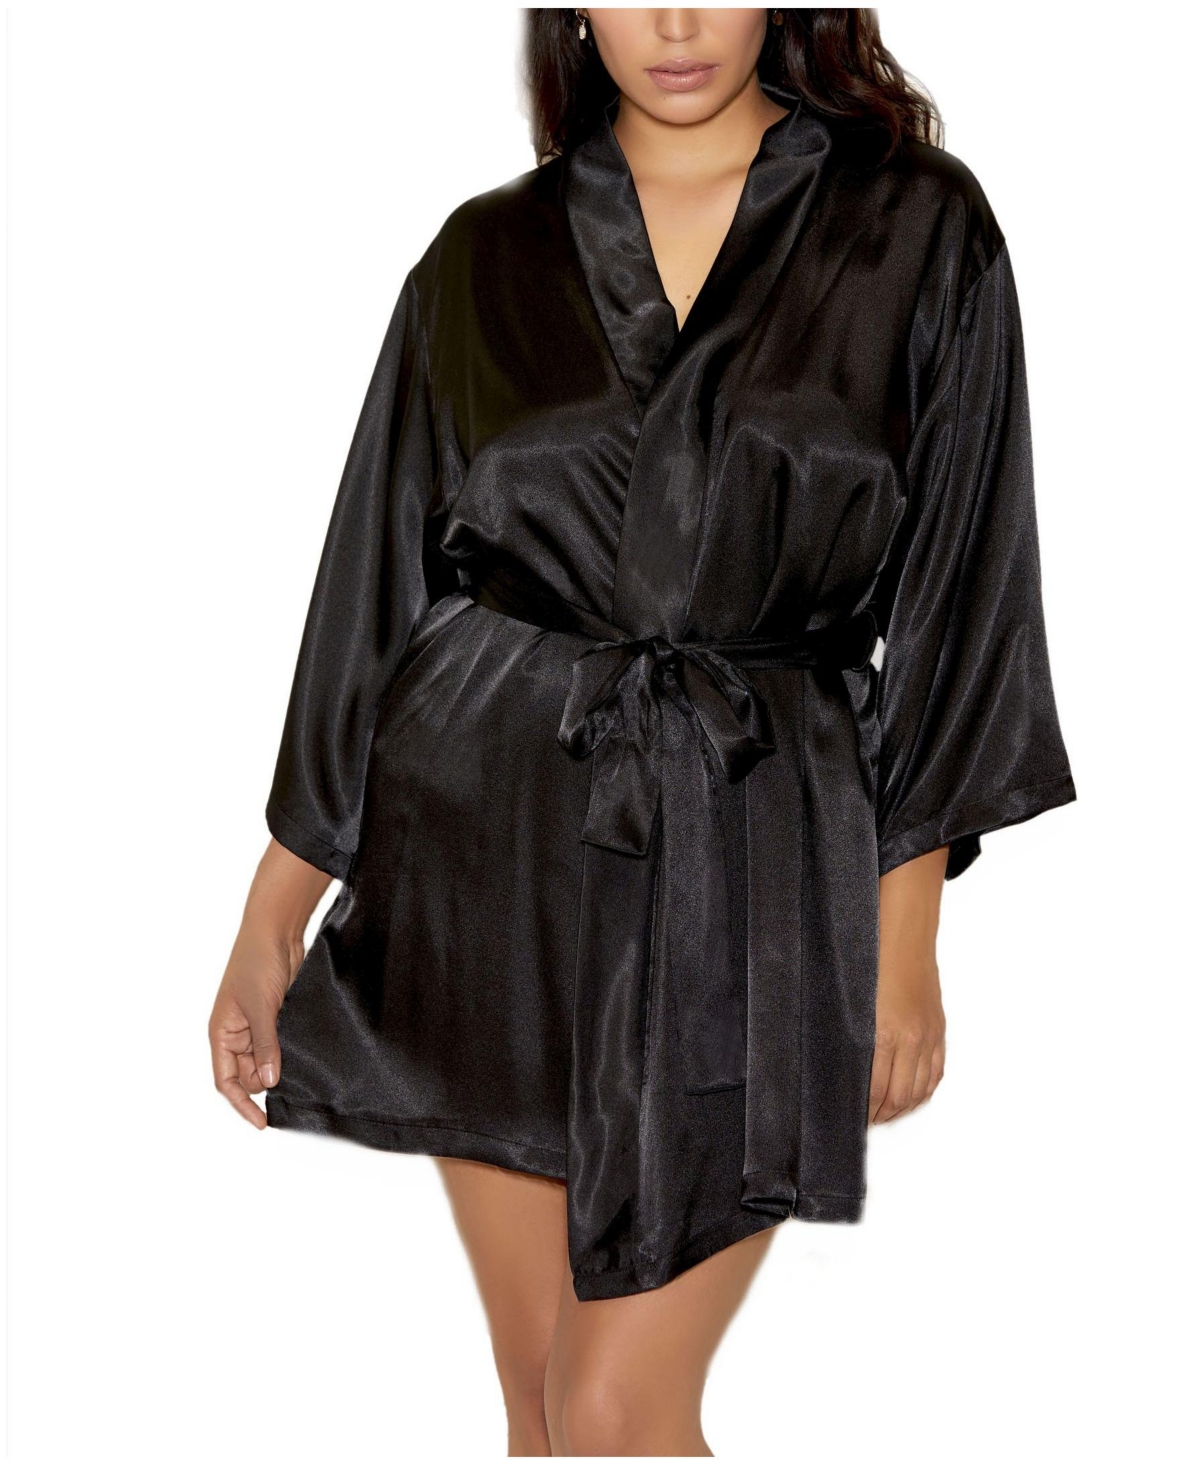 iCollection Plus Size Ultra Soft Satin Lounge and Poolside Robe